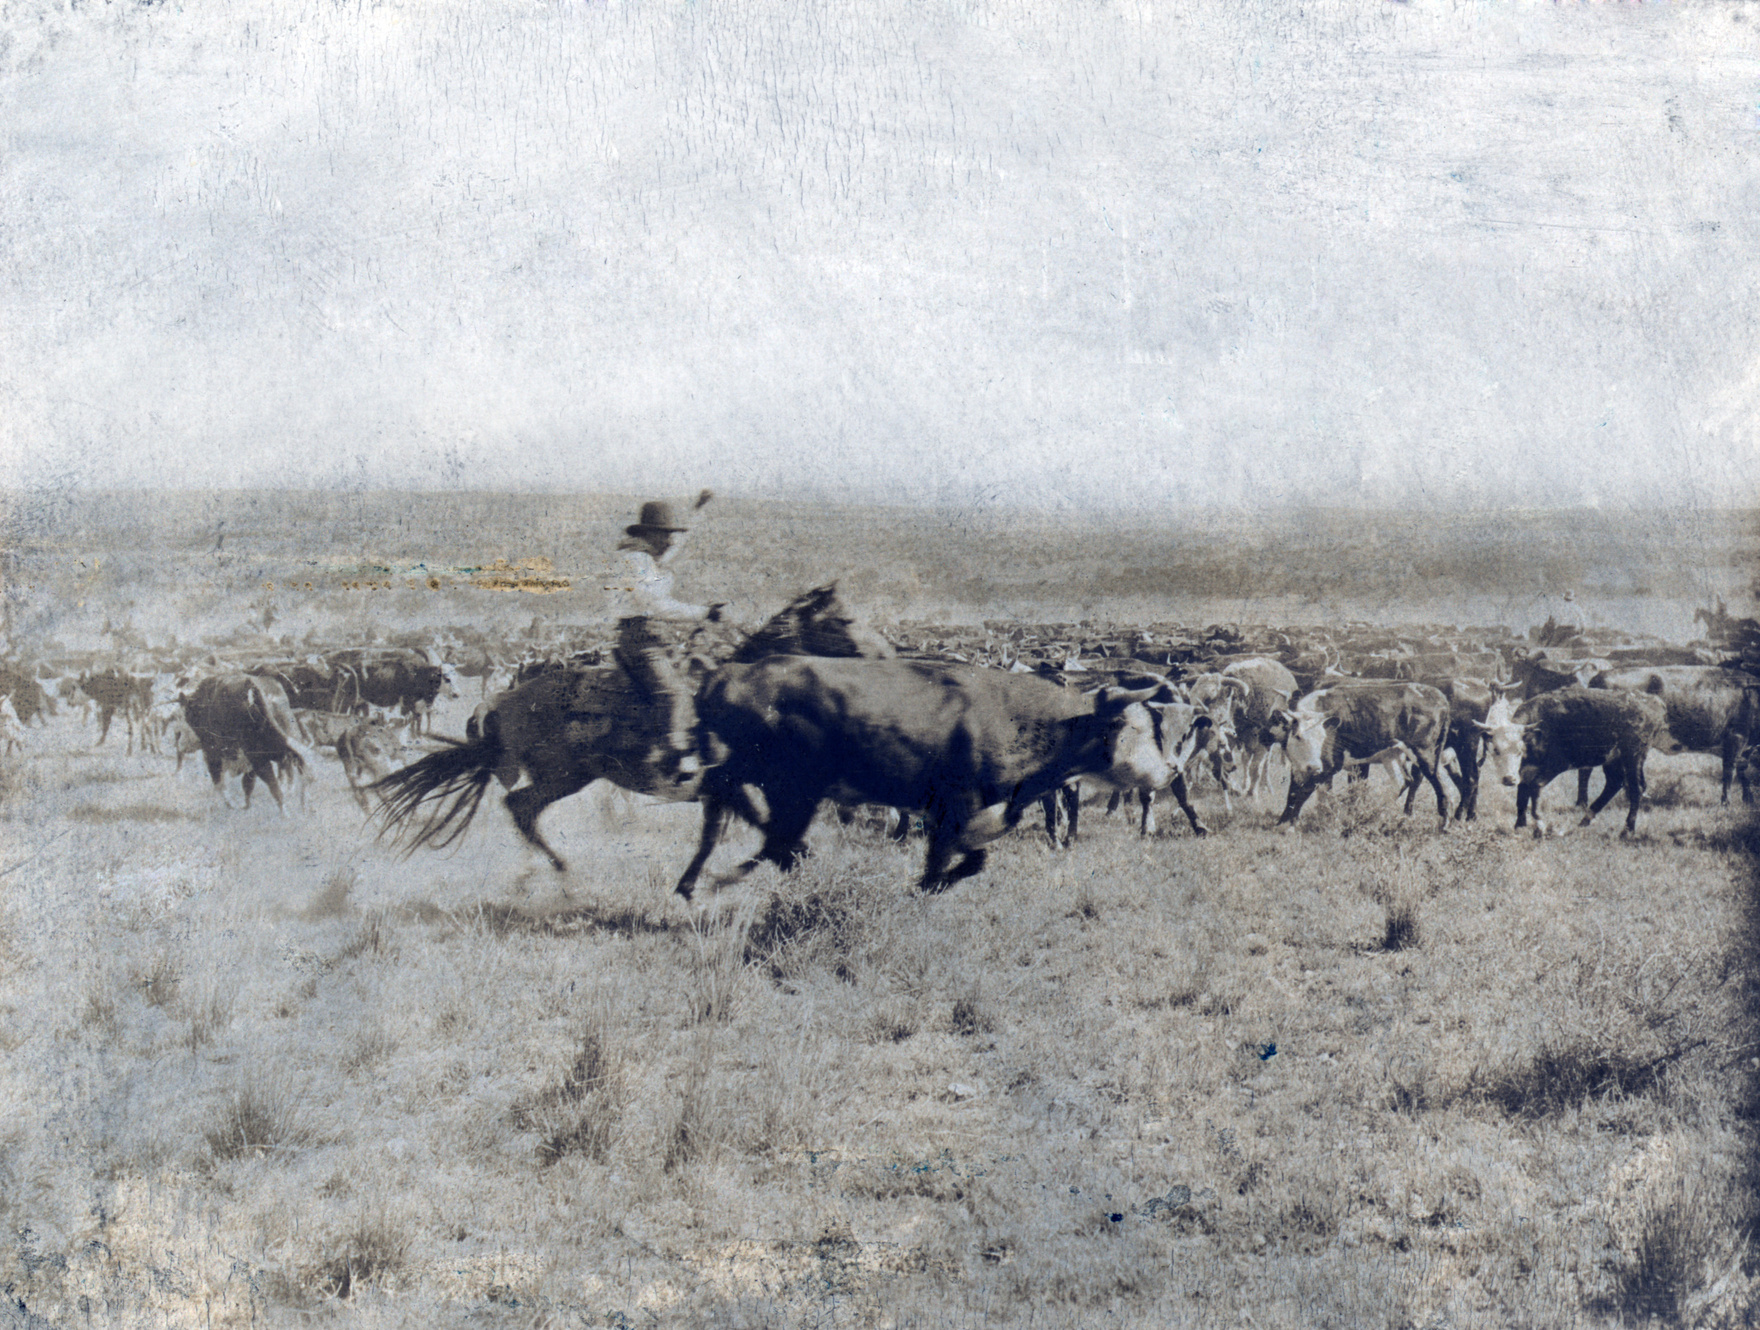 A Texas cowboy on horseback separating a cow from the rest of the herd on the LS range in Texas. photo by Erwin E. Smith, 1907